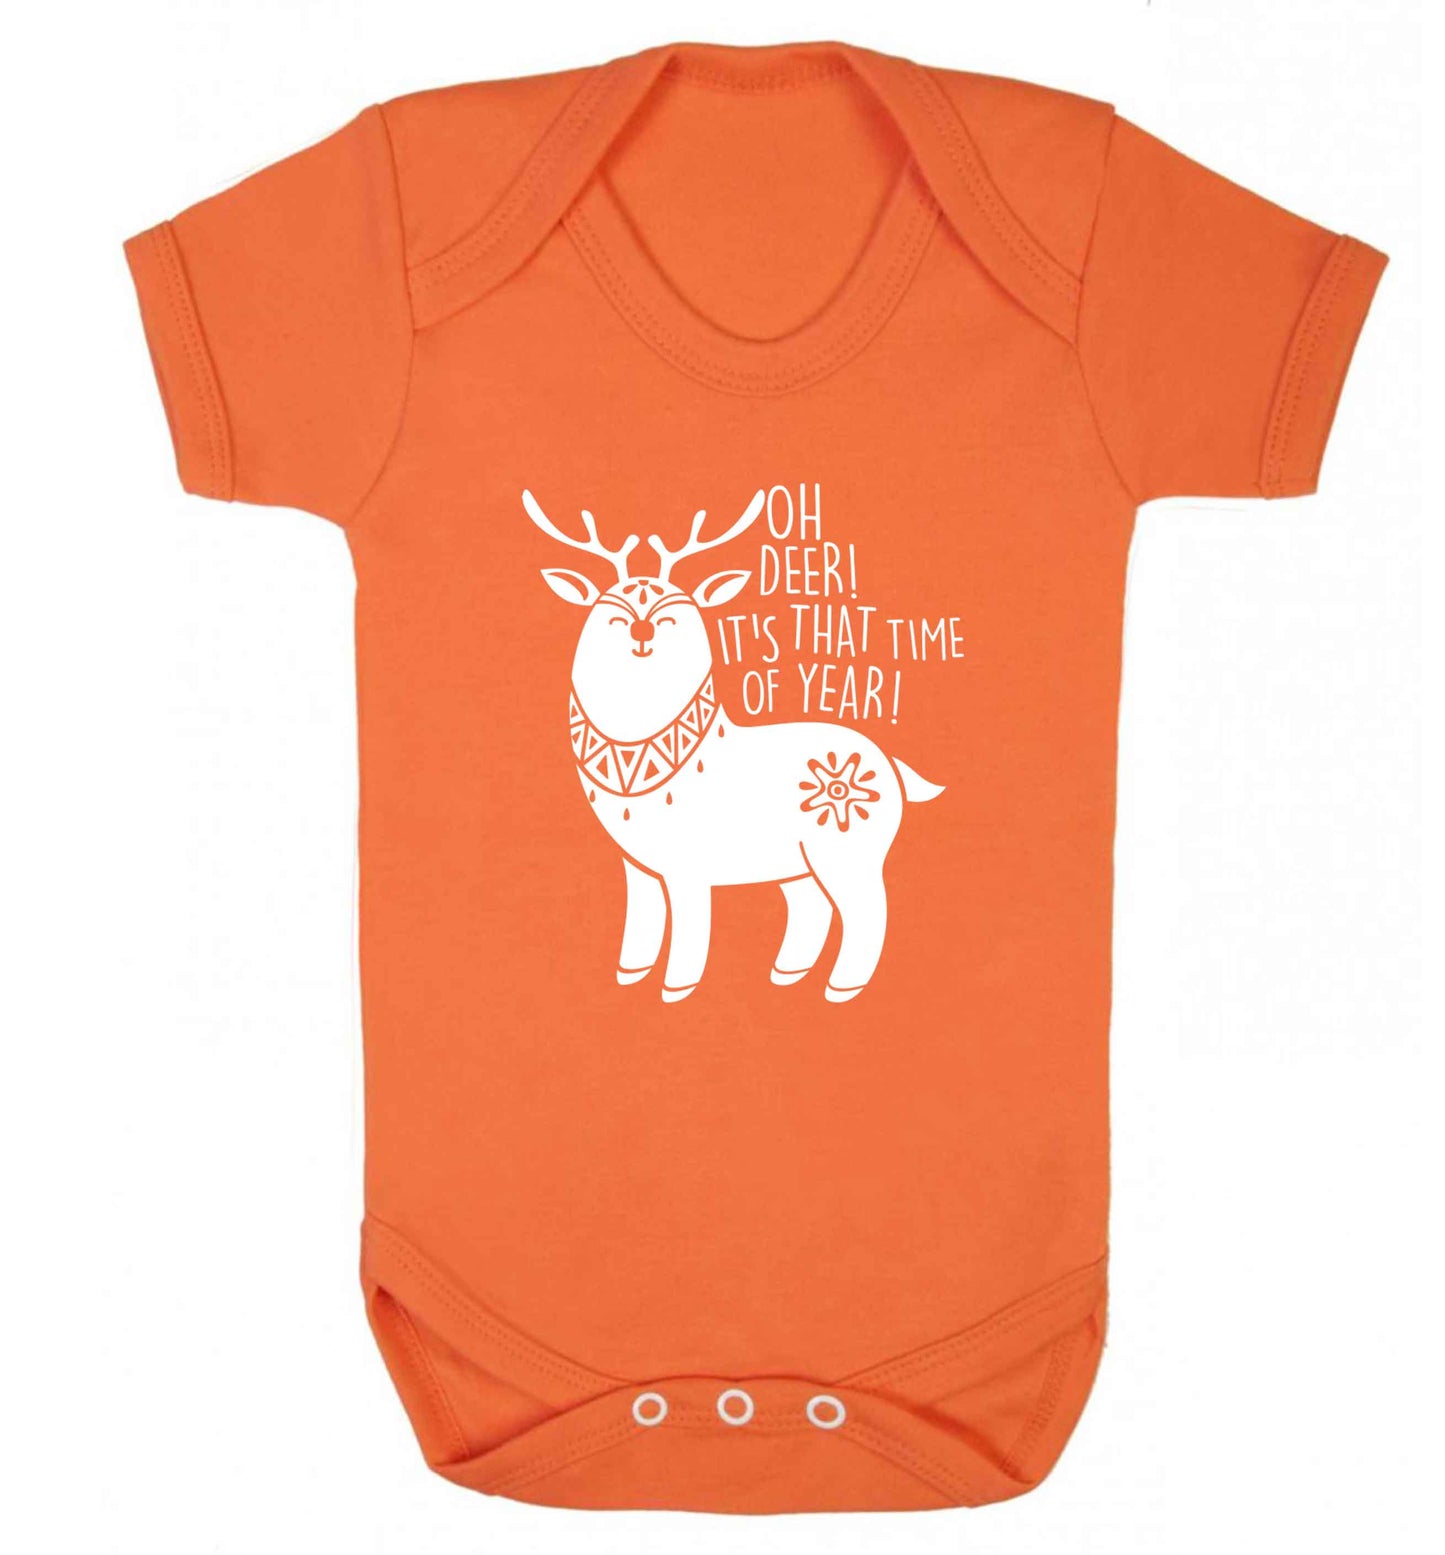 Oh dear it's that time of year Baby Vest orange 18-24 months